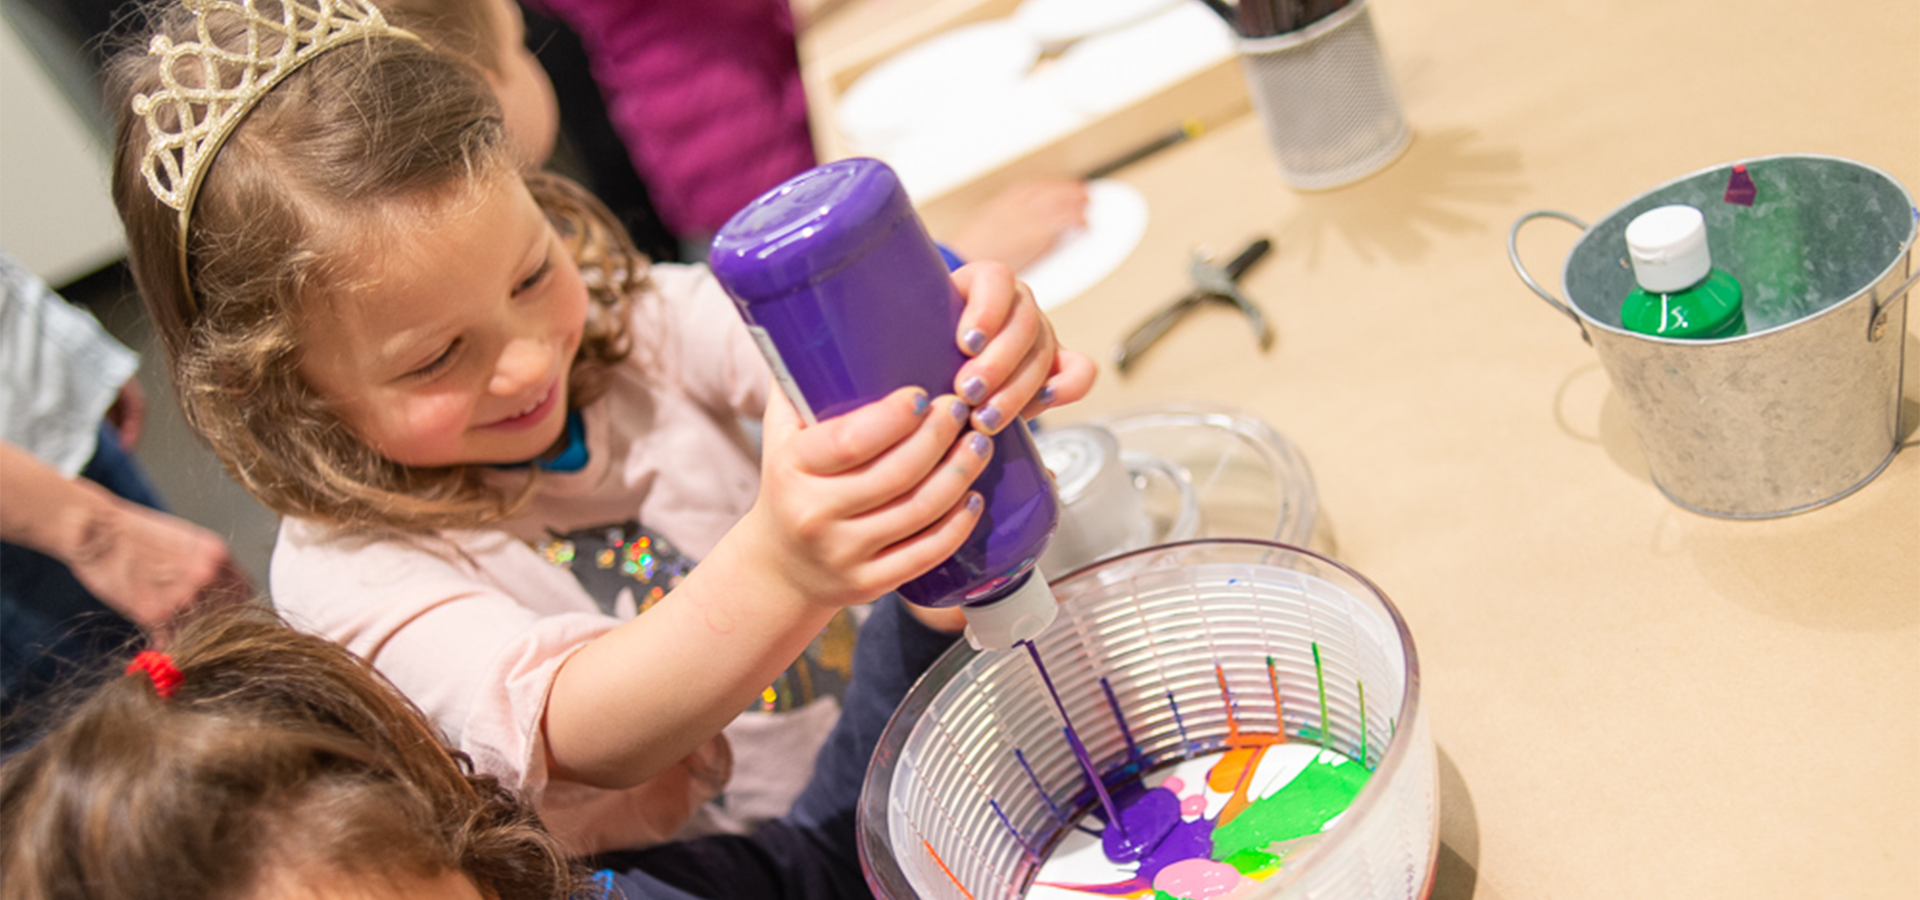 A young child squeezes a bottle of purple paint into a bowl